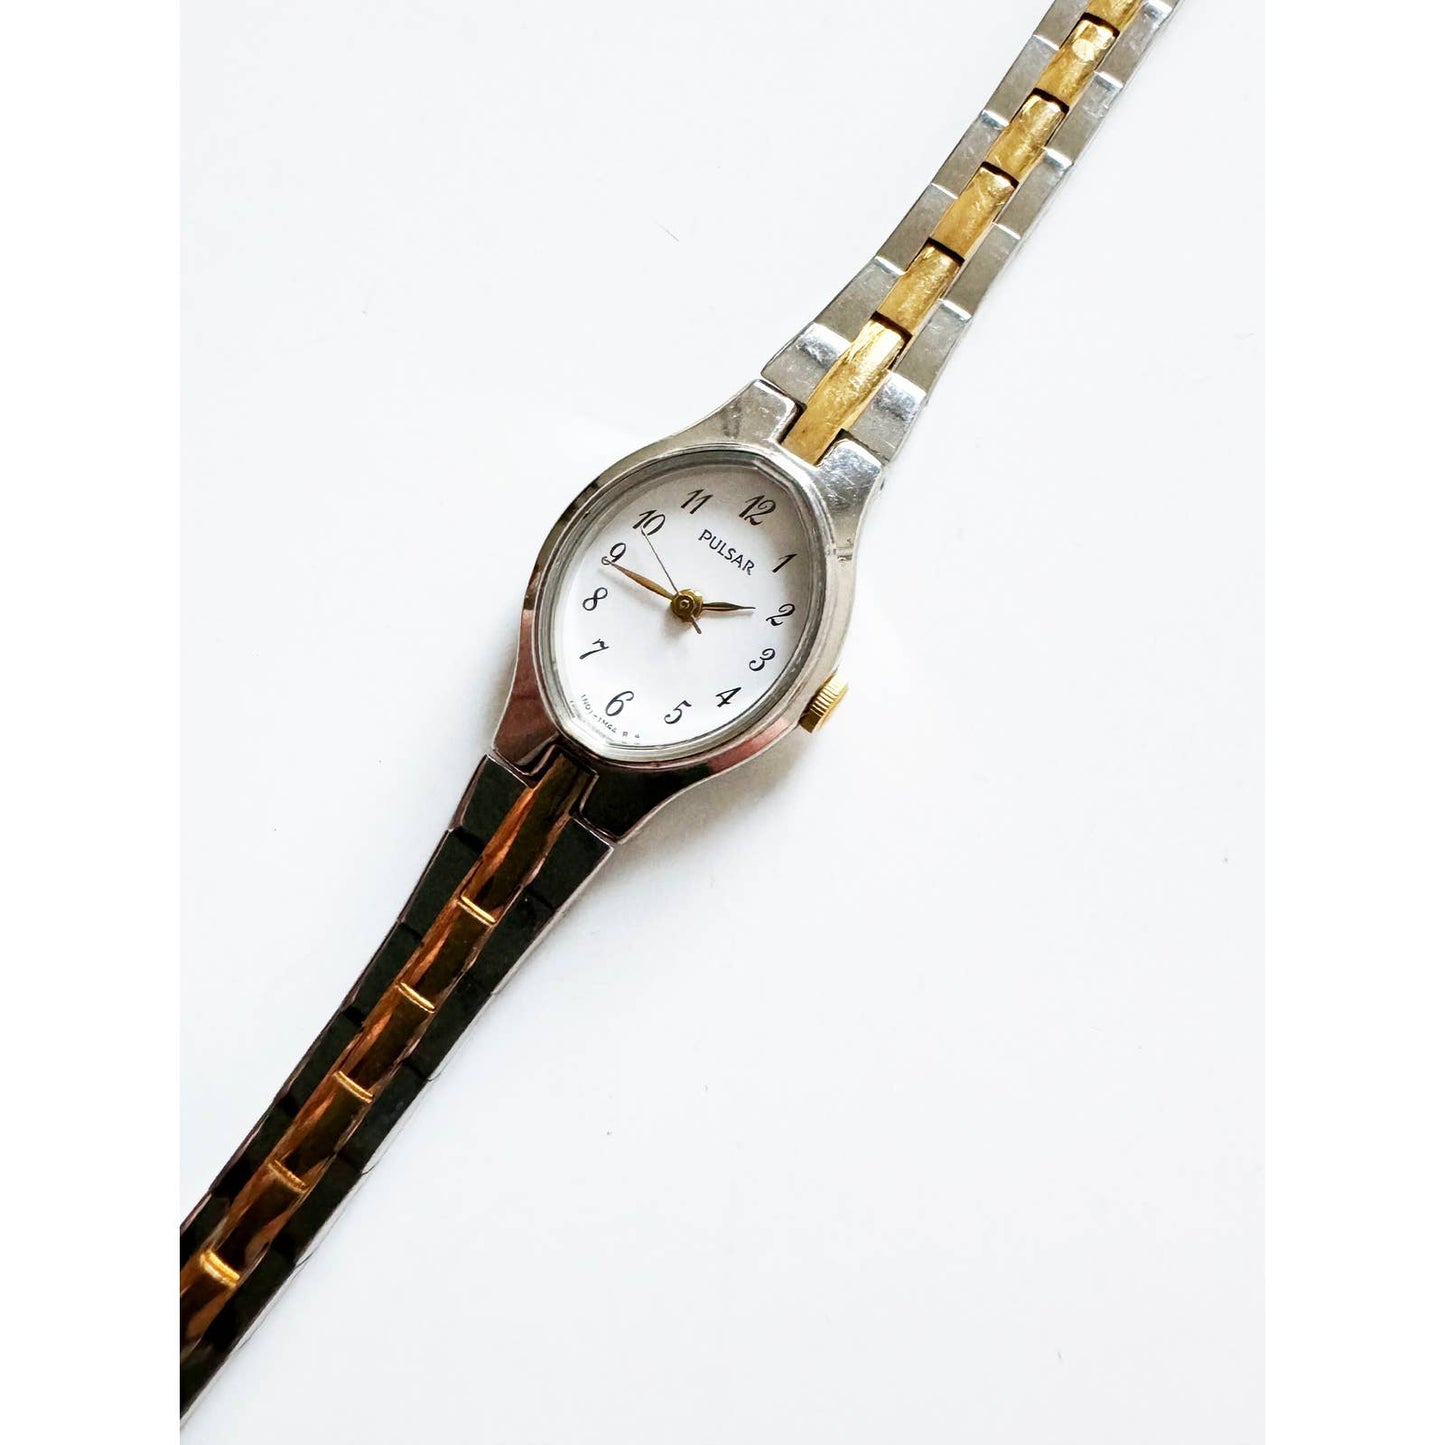 Vintage Small Two Tone Watch with Oval Face | Pulsar